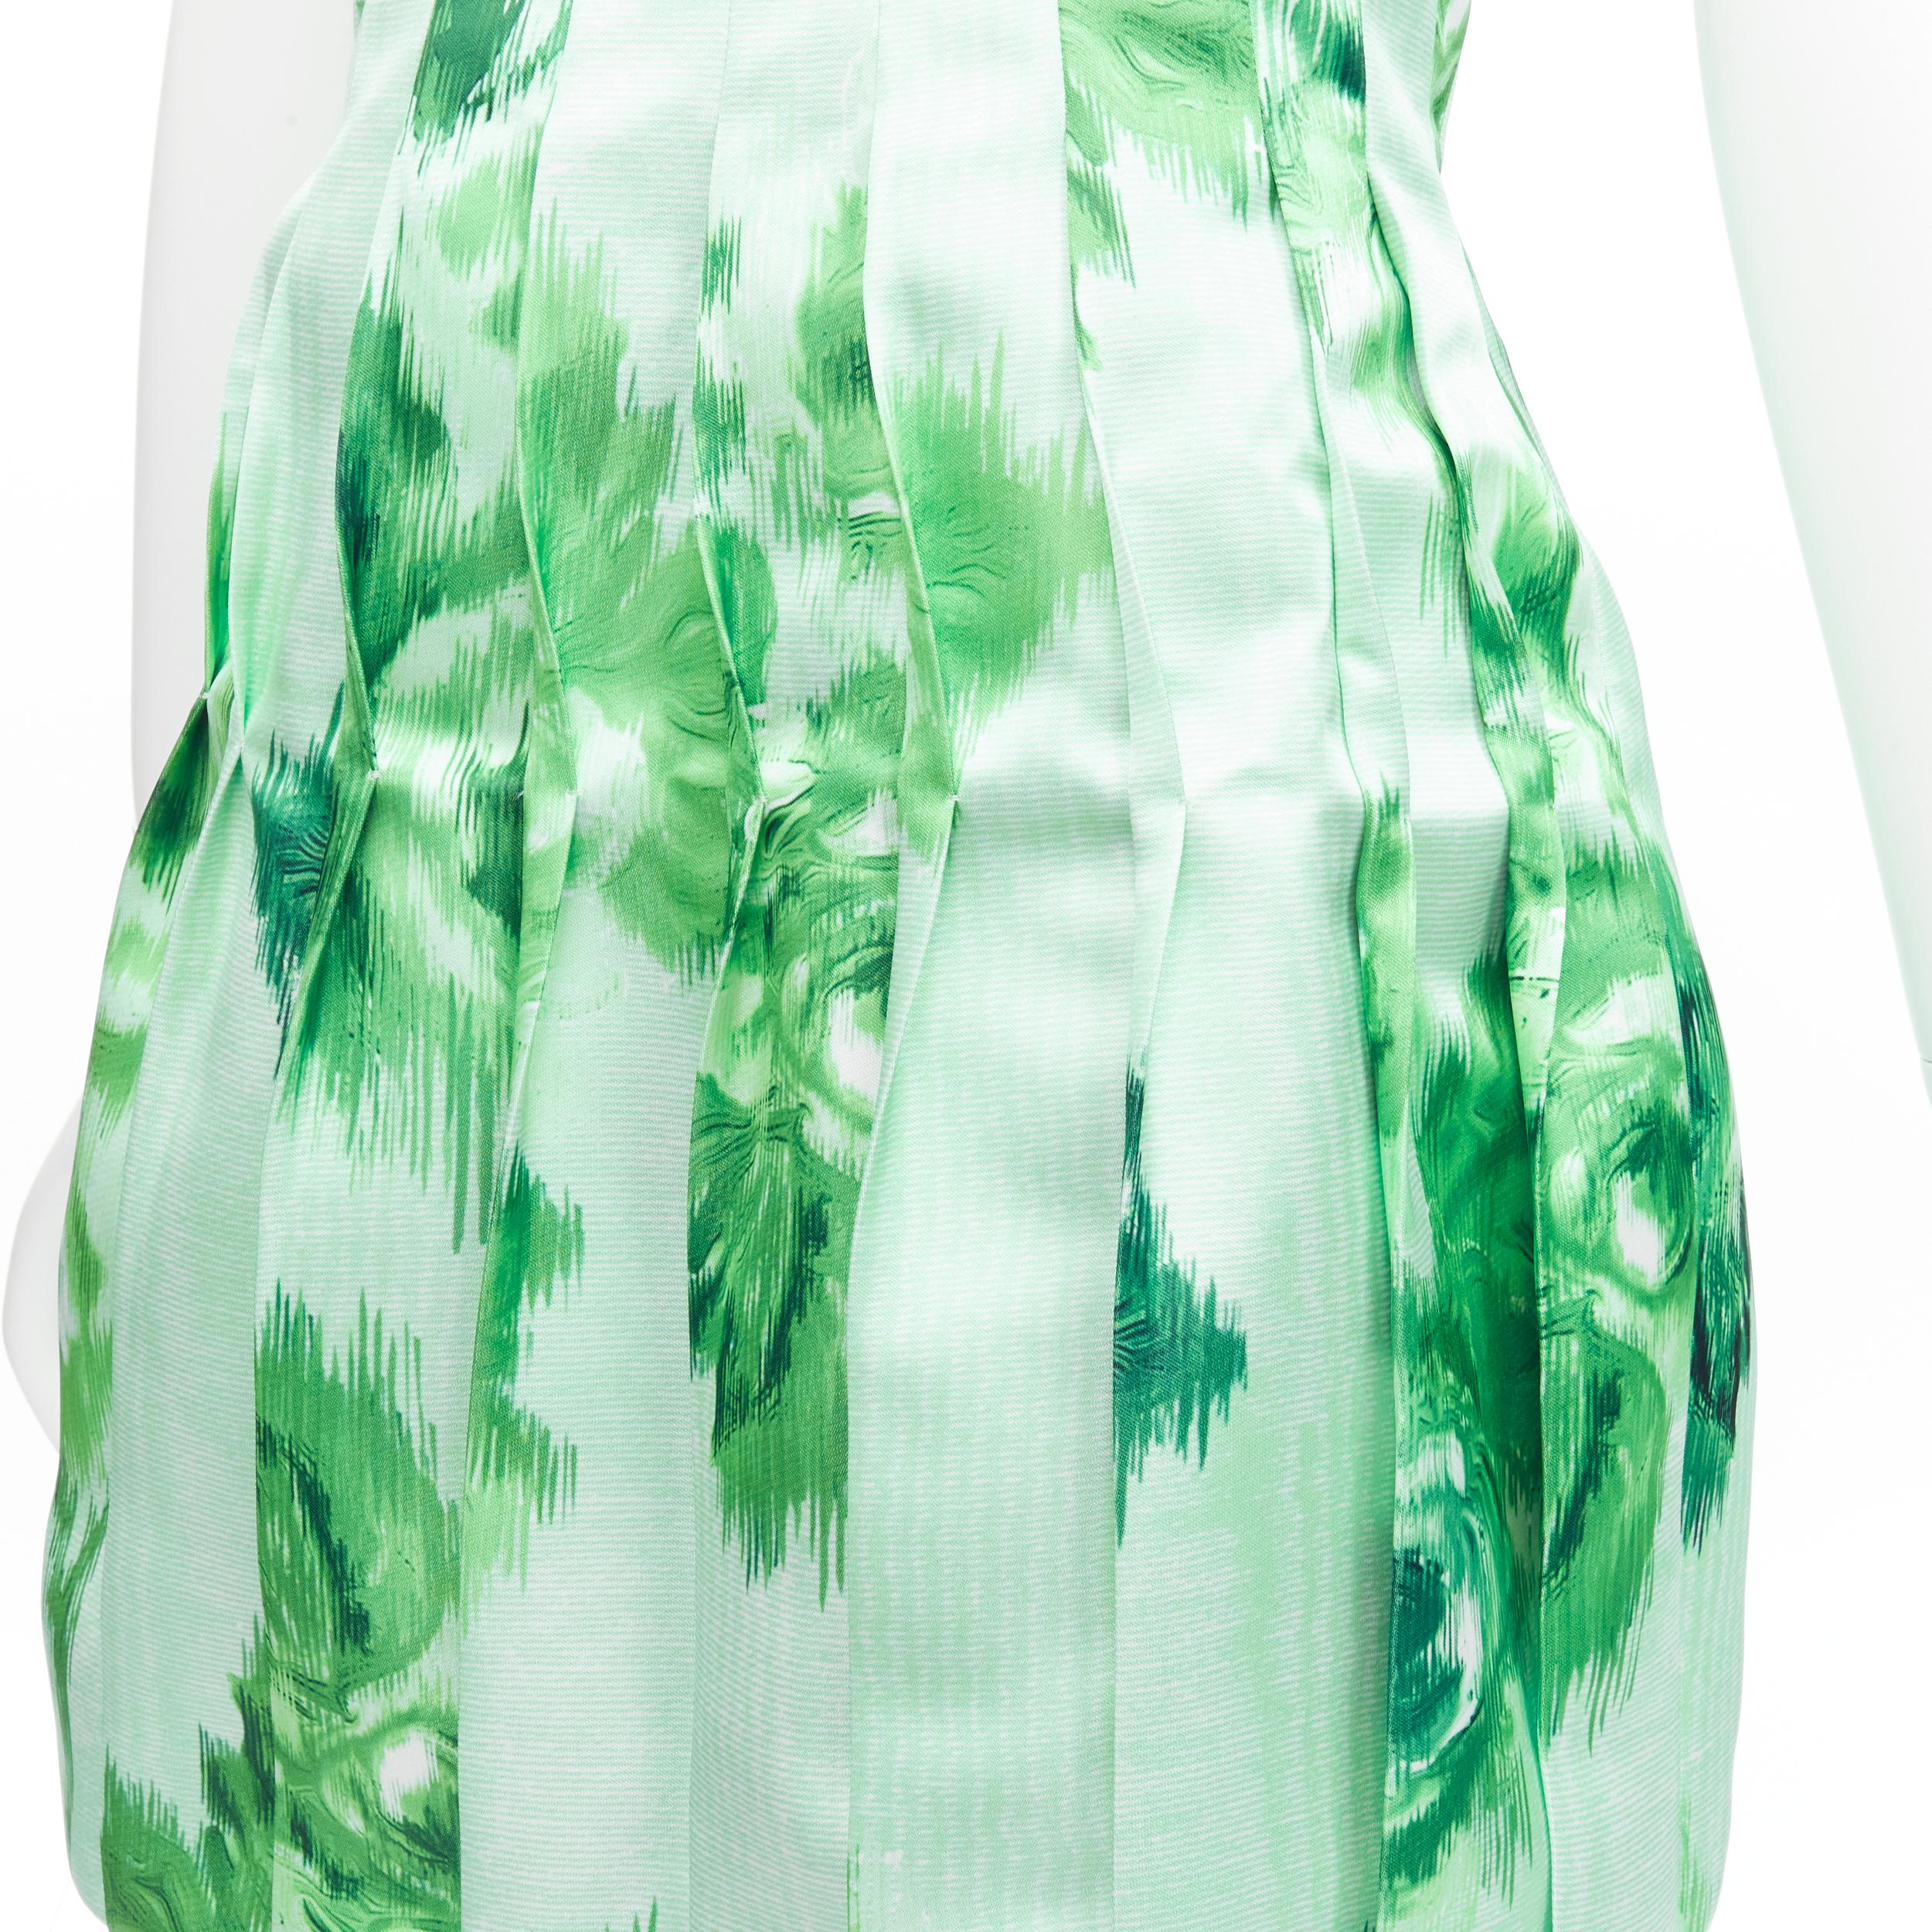 EMILIA WICKSTEAD 2022 Skylar Runway green rose tucked pleat panels corset strapless dress UK6 XS
Reference: AAWC/A00444
Brand: Emilia Wickstead
Model: Skylar
Collection: 2022 - Runway
Material: Polyester
Color: Green, White
Pattern: Photographic